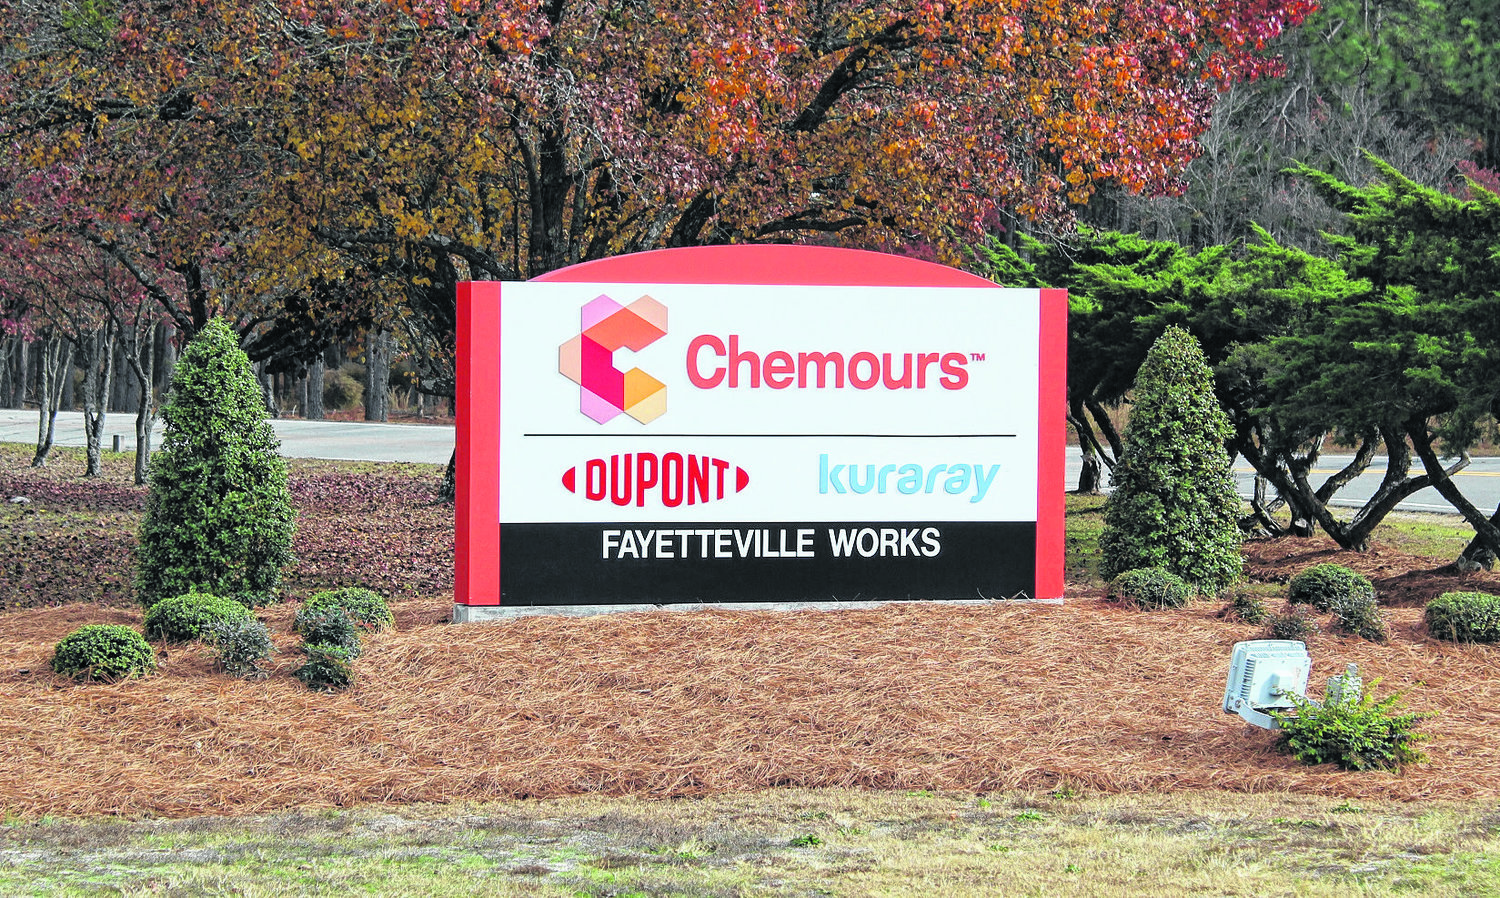 Six Cumberland County homes have been connected to public water under a new pilot program that the Chemours chemical company has implemented to meet the requirements of a consent order.